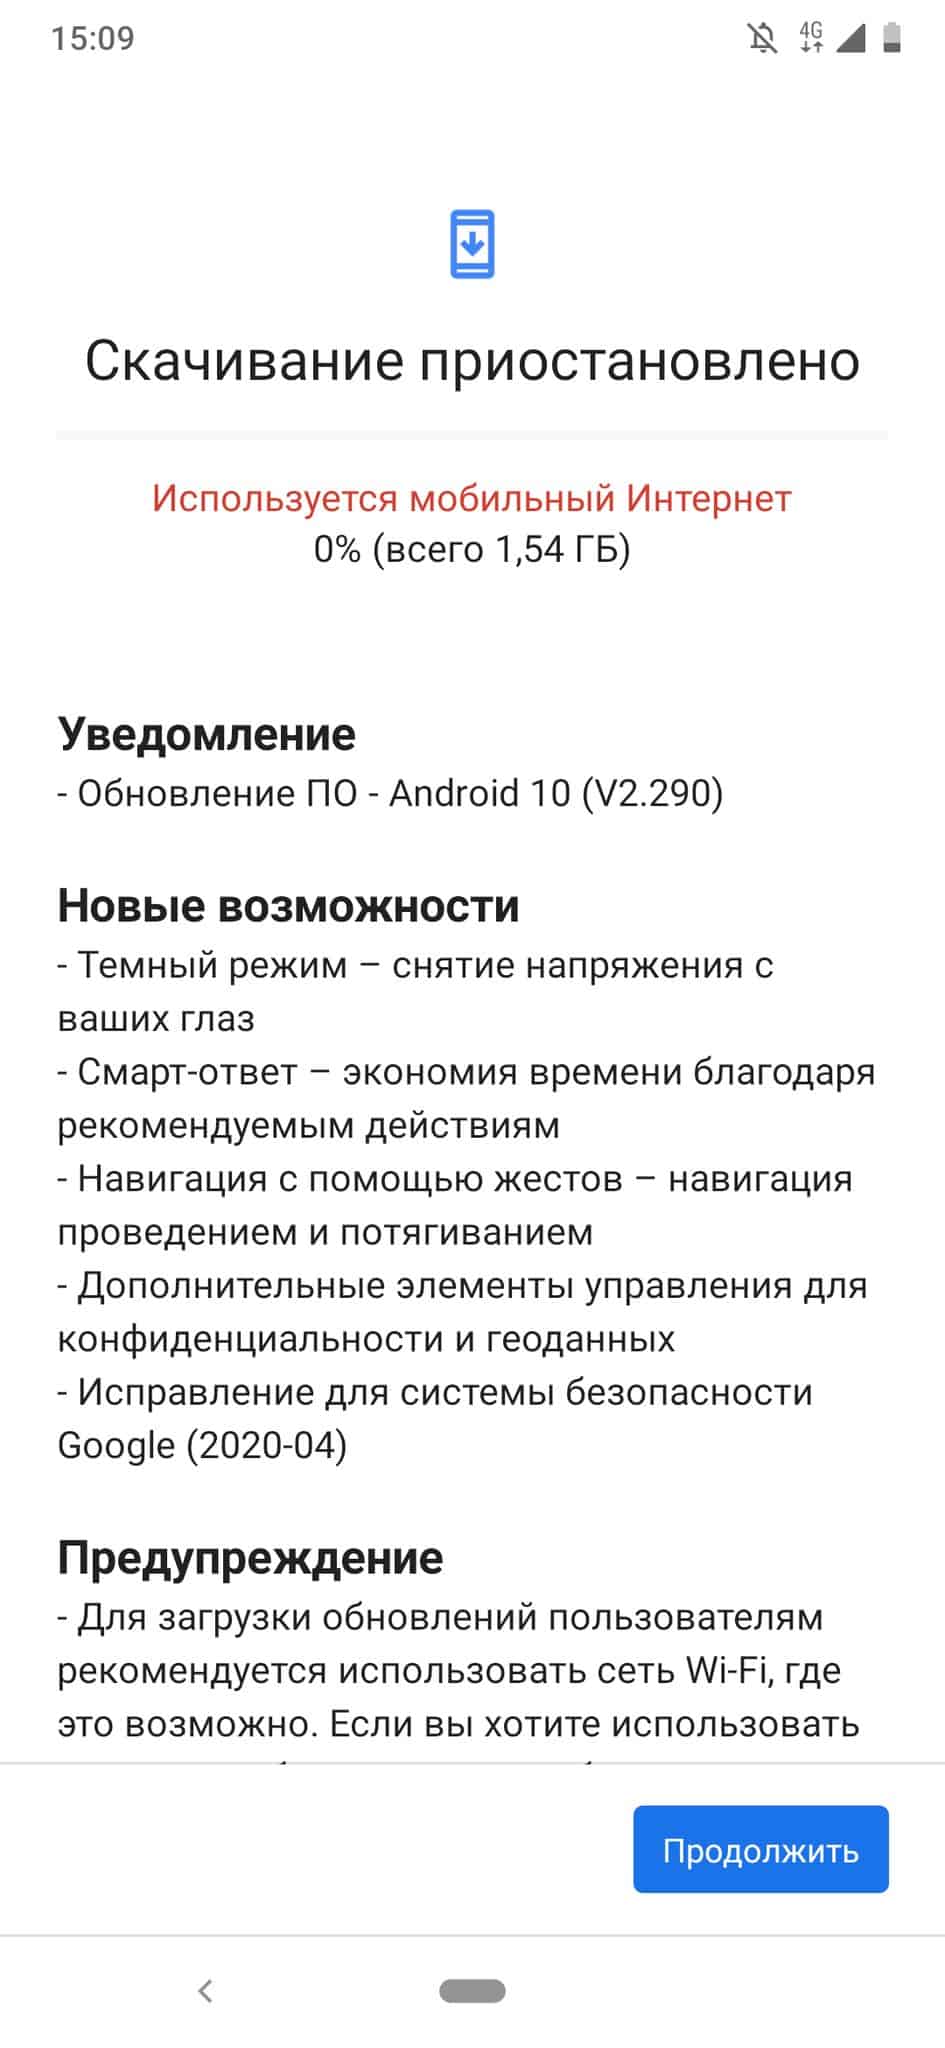 Nokia 6.2 Android 10 changelog